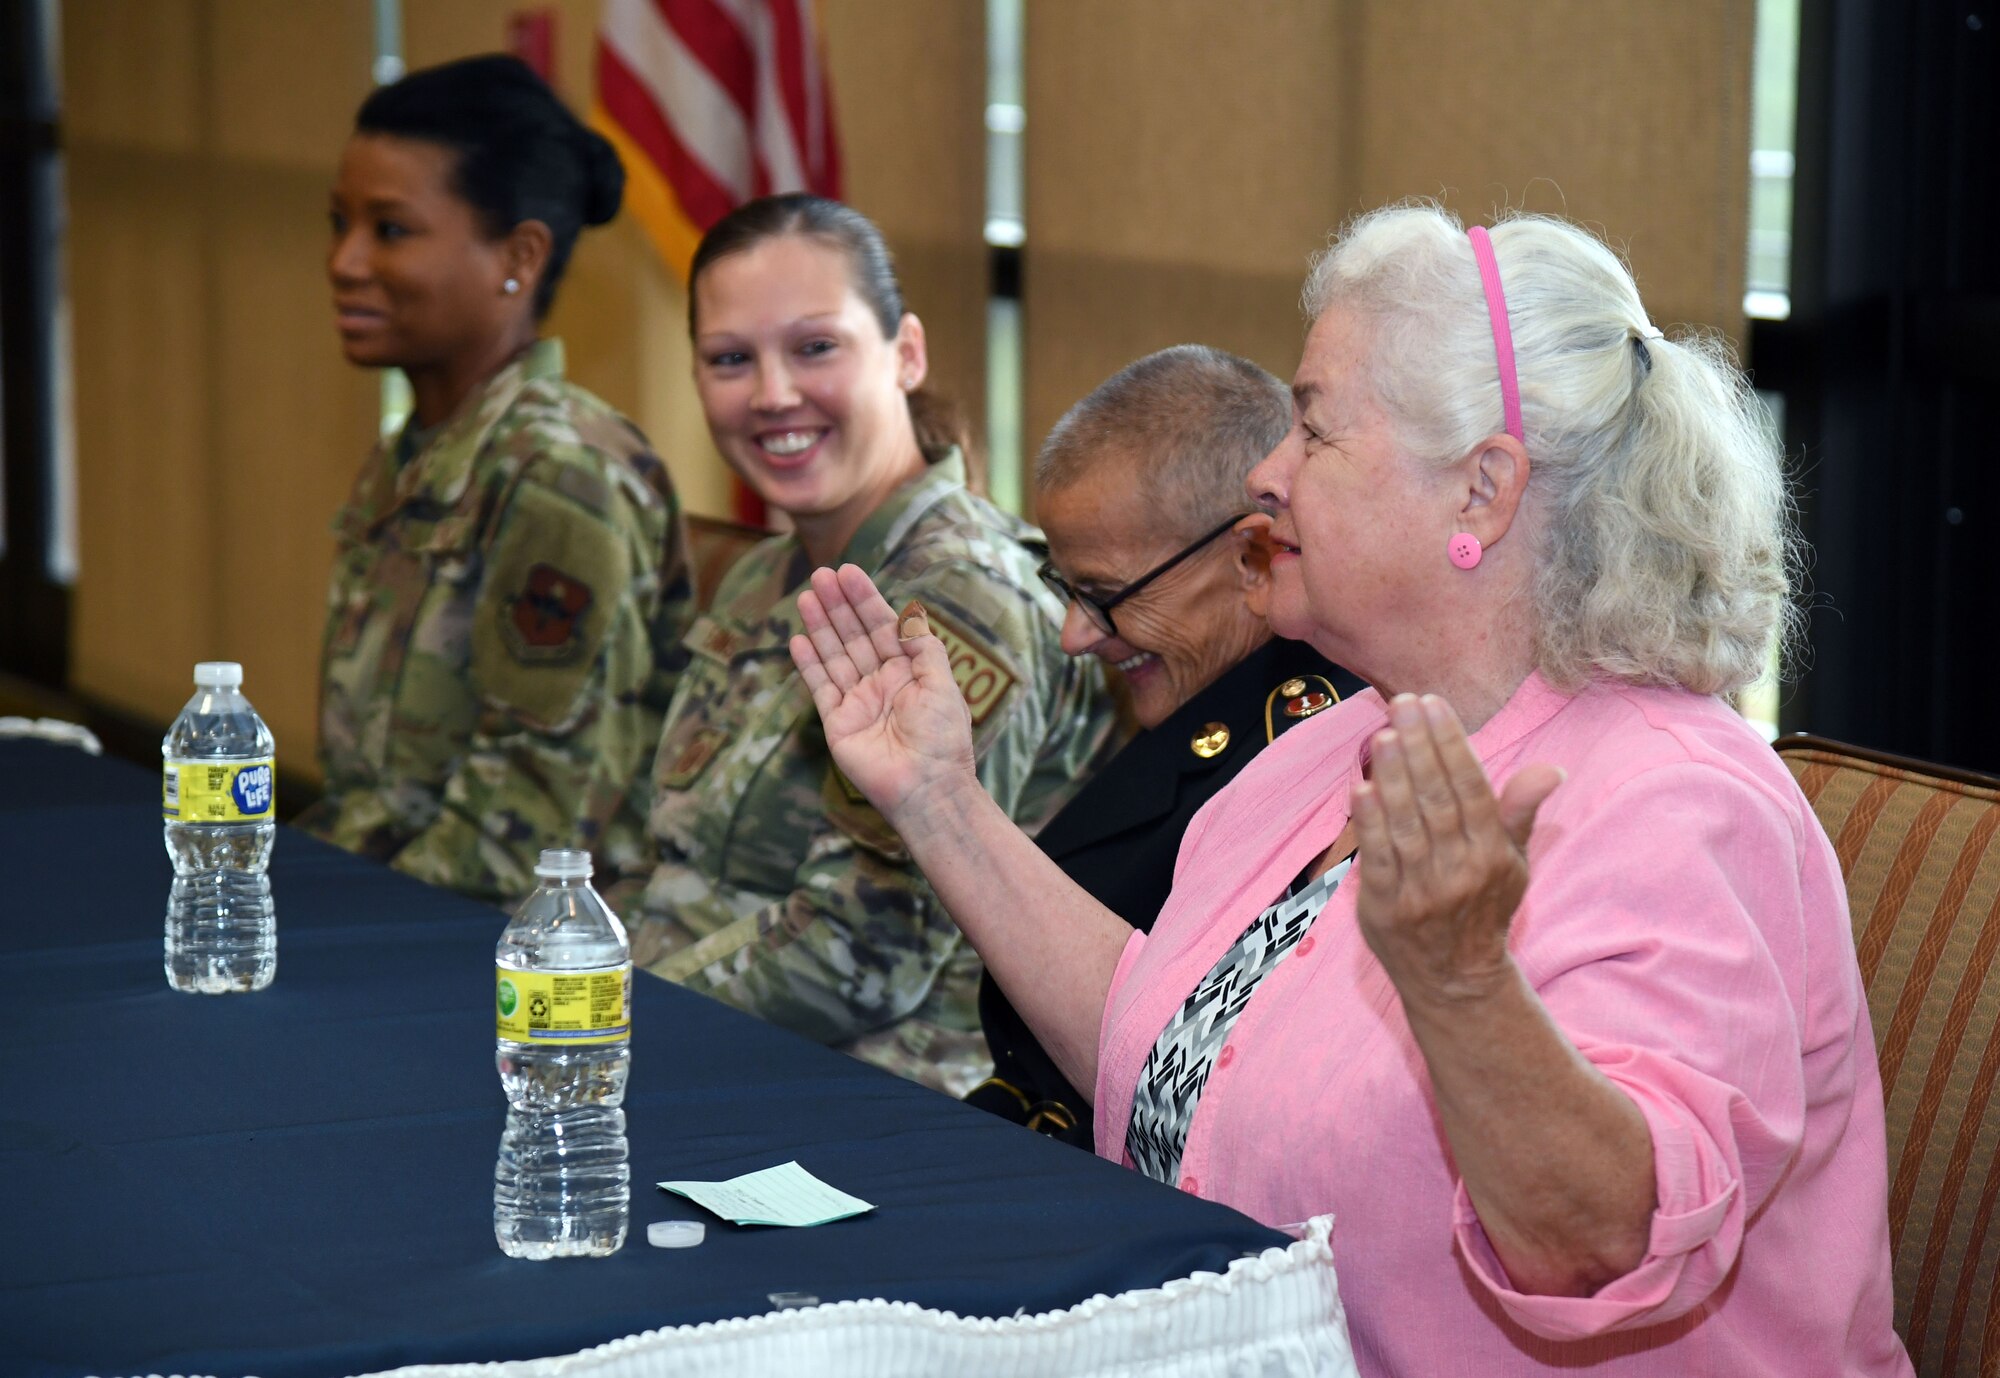 U.S. Air Force Retired Master Sgt. Sharon Price delivers remarks during the Women's Equality Day event inside the Bay Breeze Event Center at Keesler Air Force Base, Mississippi, Aug. 26, 2022. On Women's Equality Day, we honor the movement for universal suffrage that led to the 19th Amendment, celebrate the progress of women over the years, and renew our commitment to advancing gender equity and protecting women's rights. (U.S. Air Force photo by Kemberly Groue)